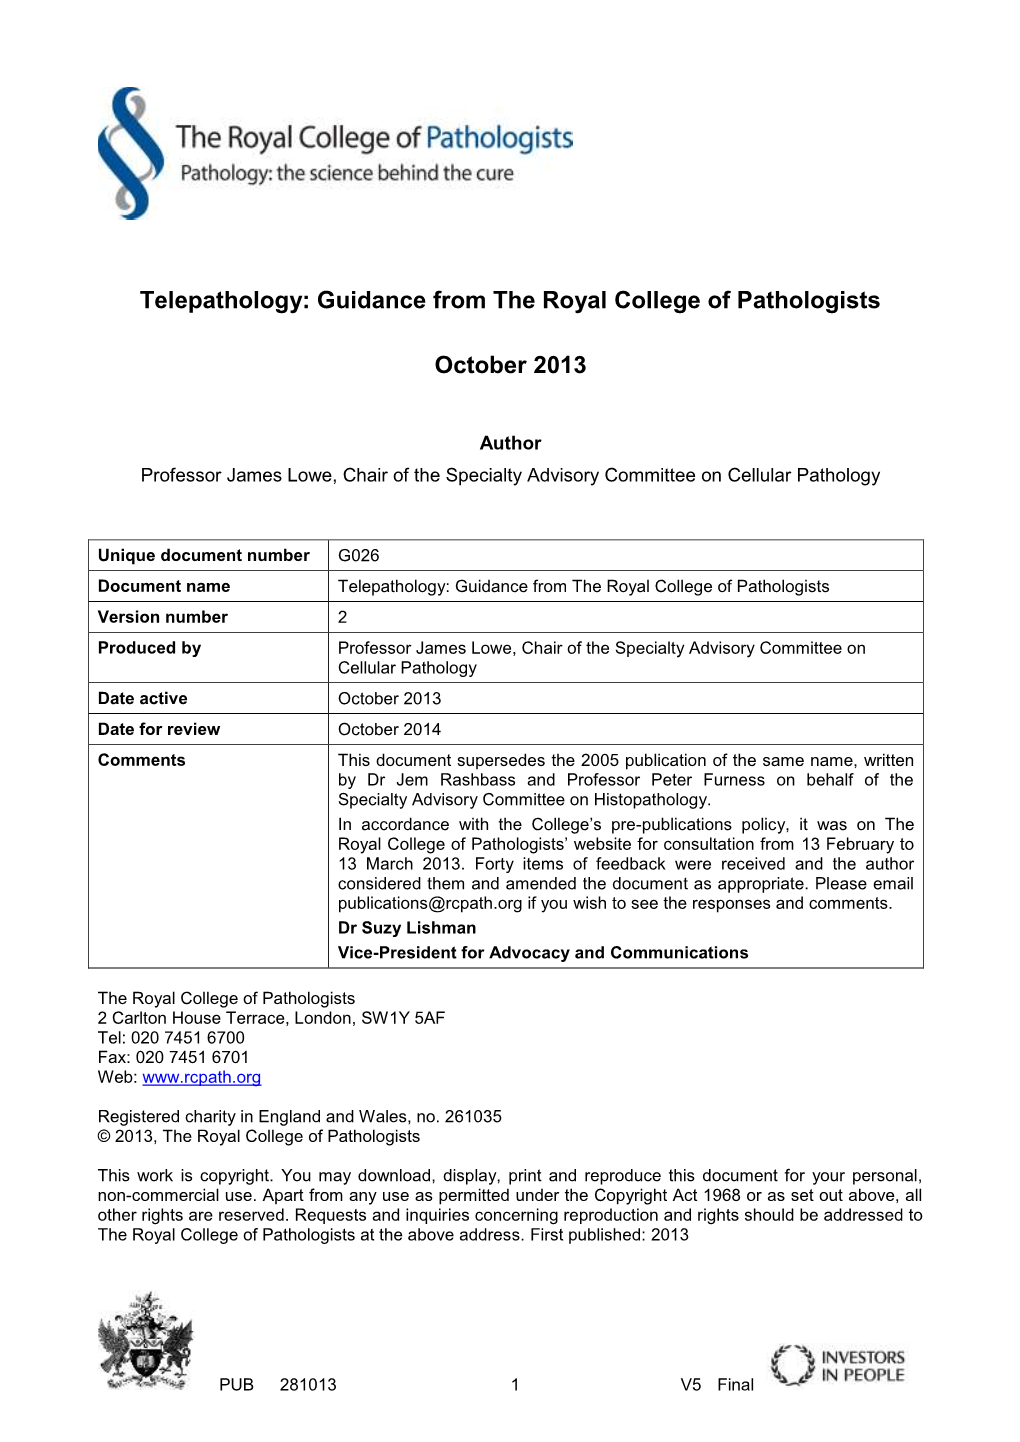 Telepathology: Guidance from the Royal College of Pathologists